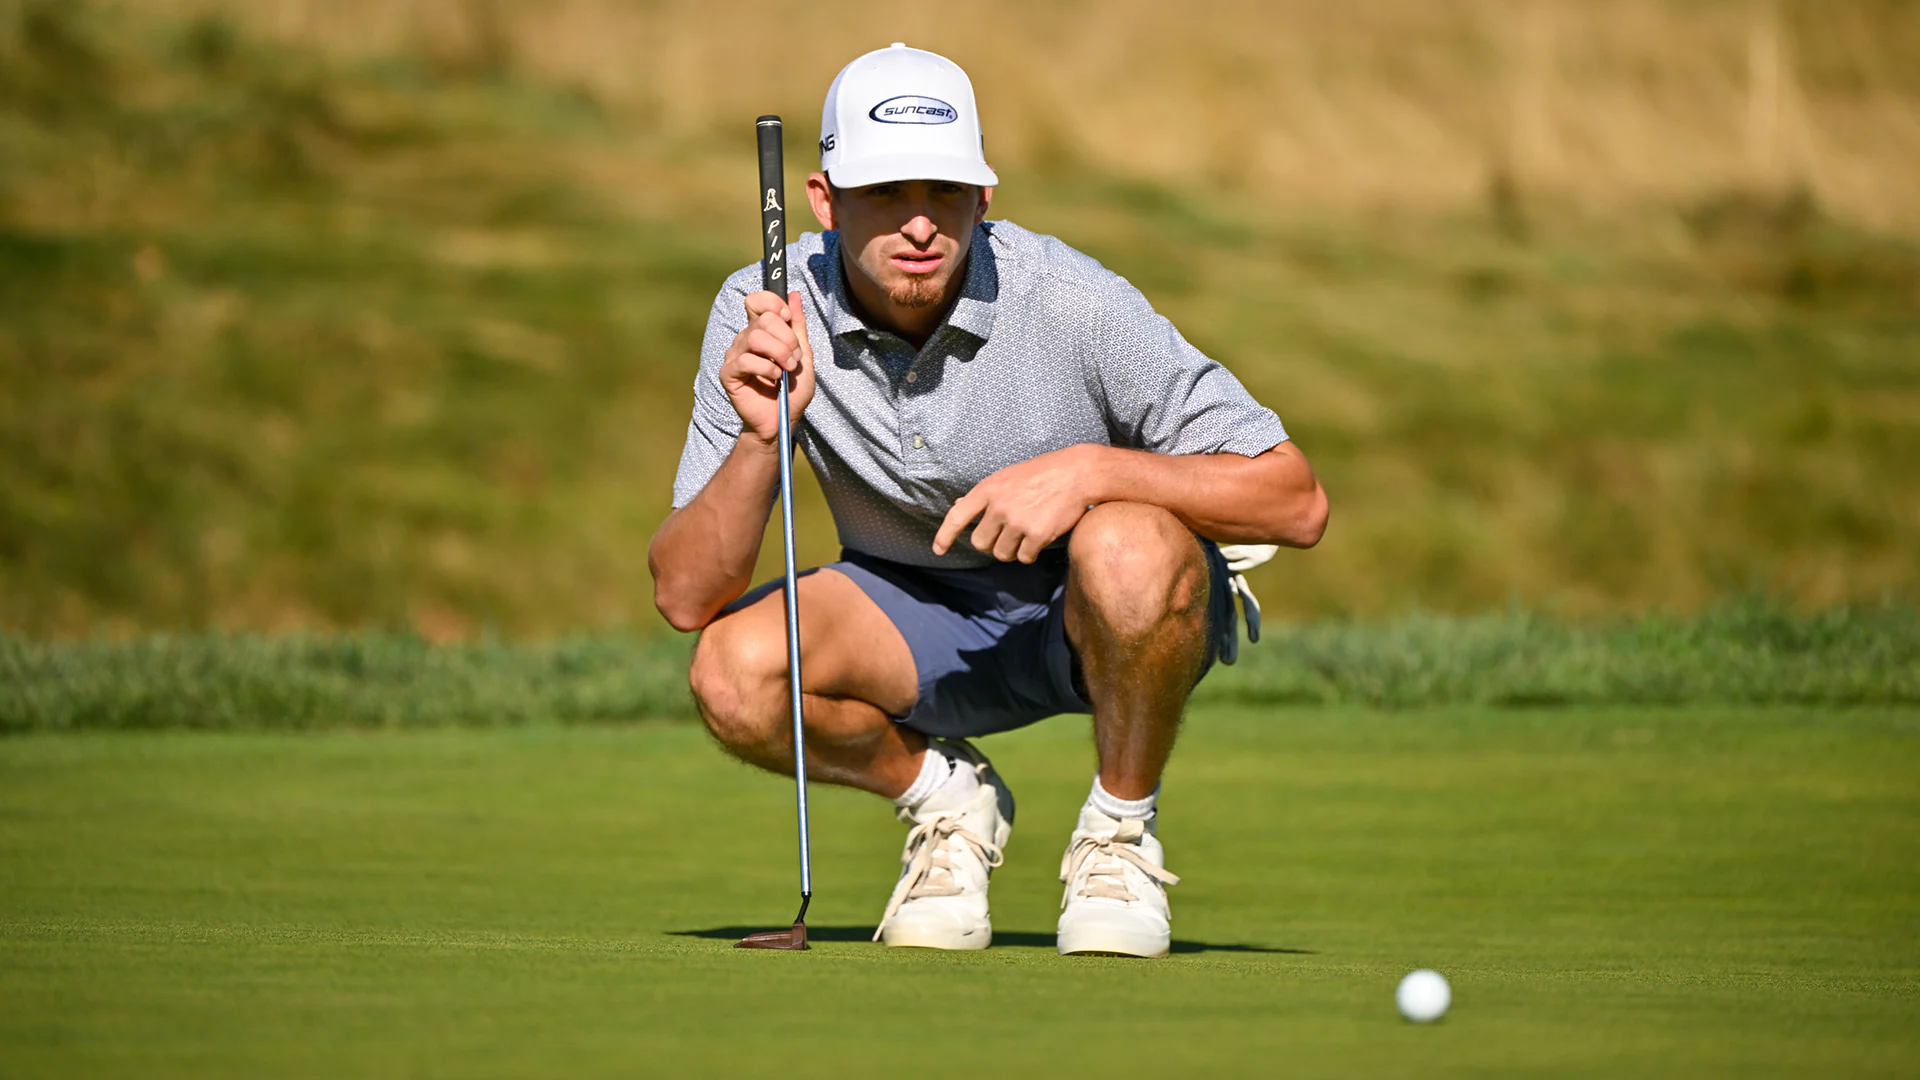 Sam Bennett continues to navigate tough U.S. Amateur path, and now he draws Stewart Hagestad